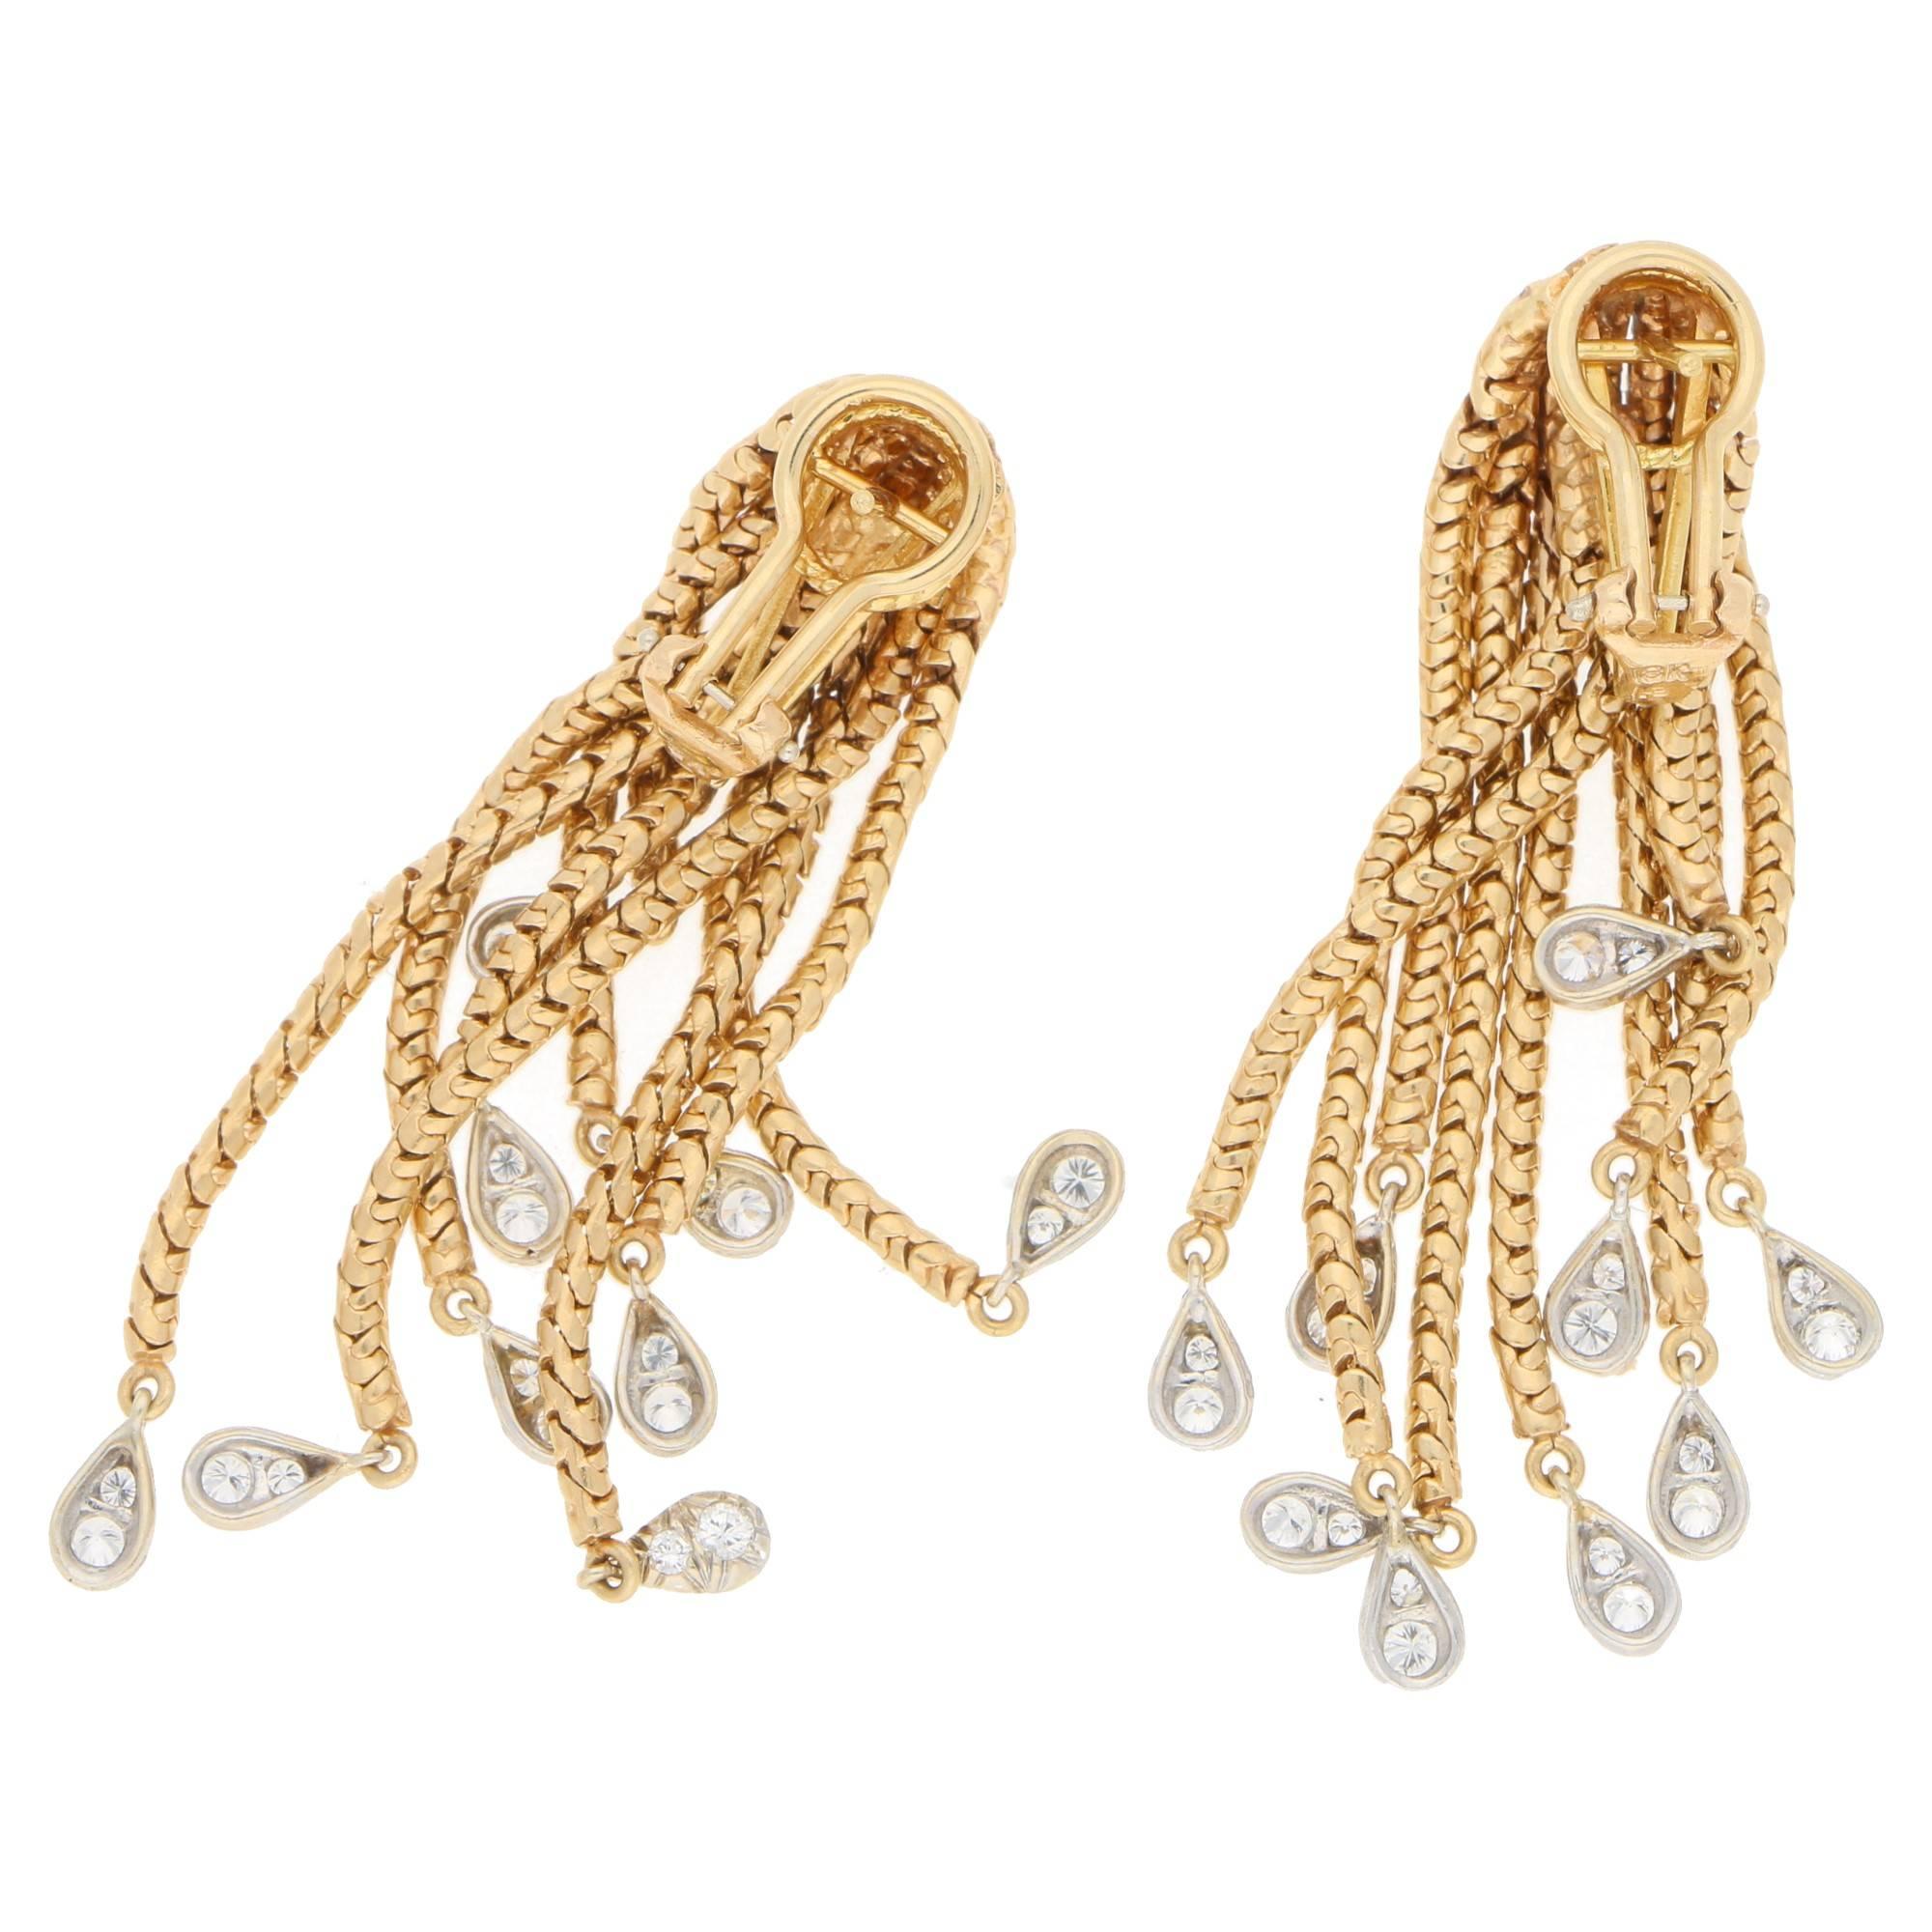 A fantastic pair of 1960's Hammerman Brothers diamond tassel earrings. Each earring is formed of nine graduated 18ct yellow gold box chain tassels merged at the crown, terminating in a platinum tear drop grain-set with two round brilliant cut